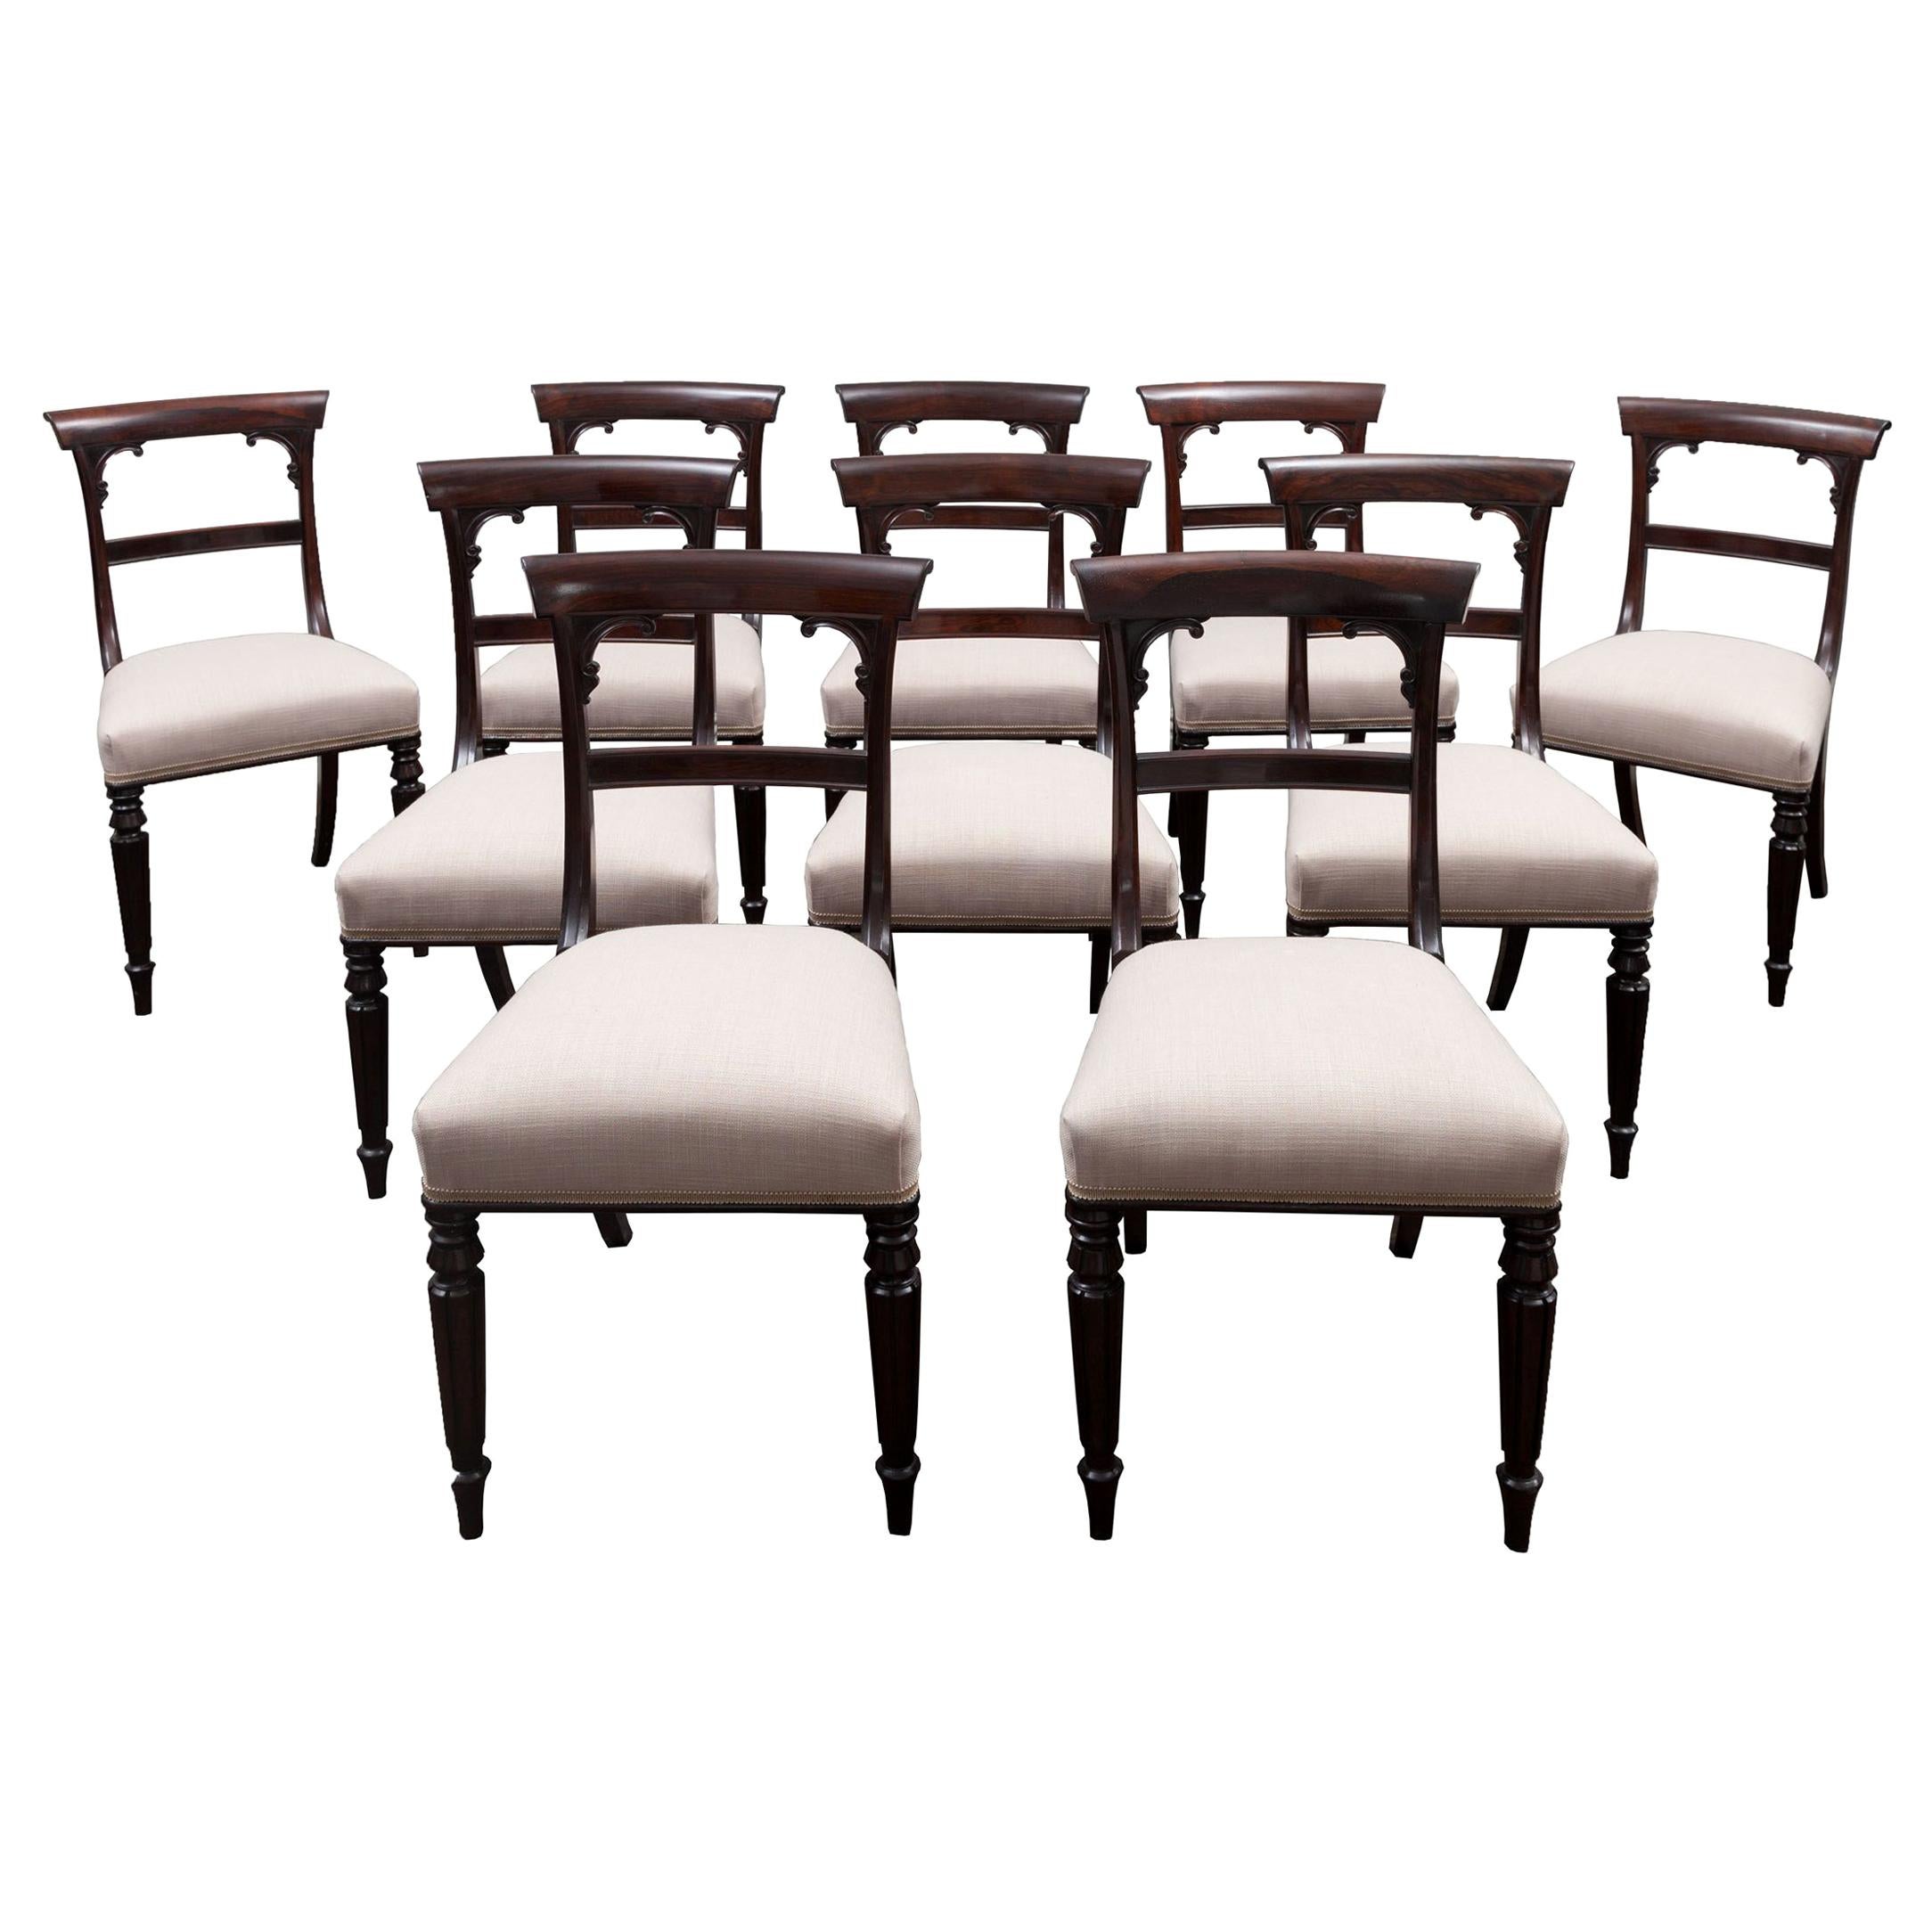 Set of 10 Antique Dining Chairs